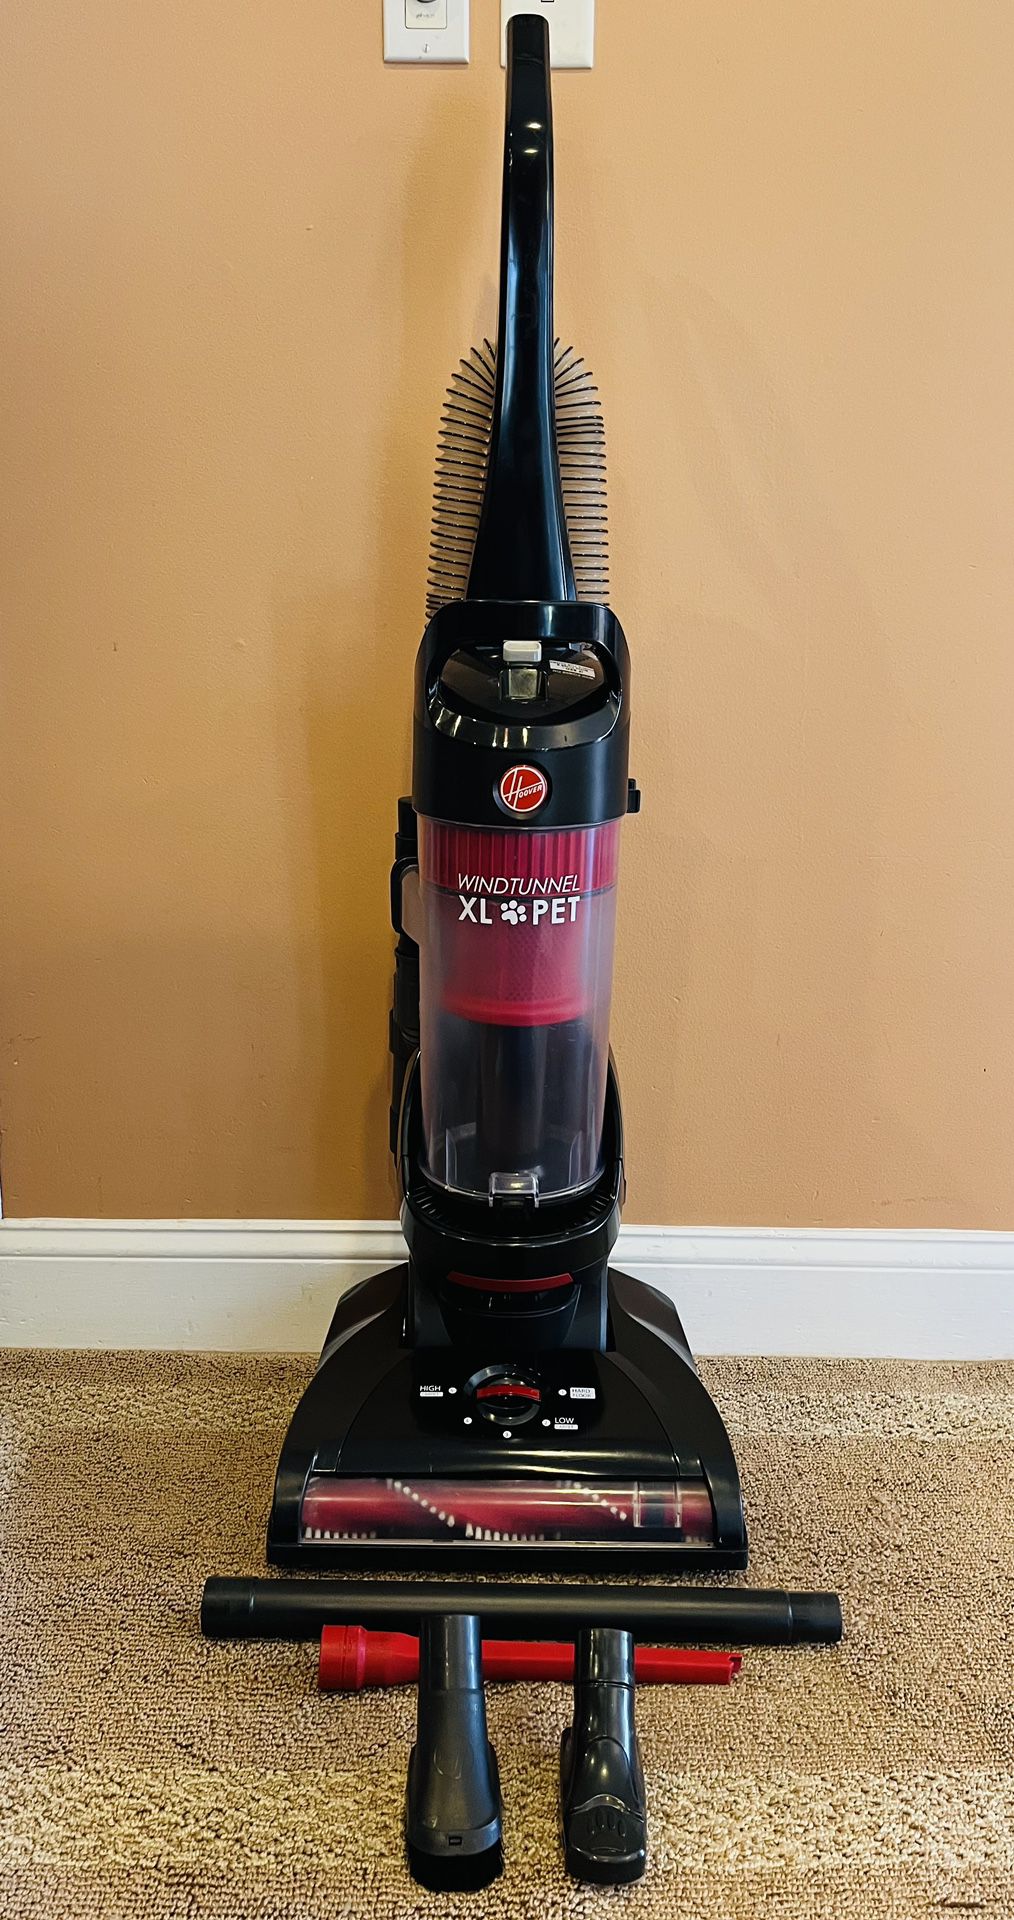 Hoover wind tunnel, XL pet vacuum cleaner